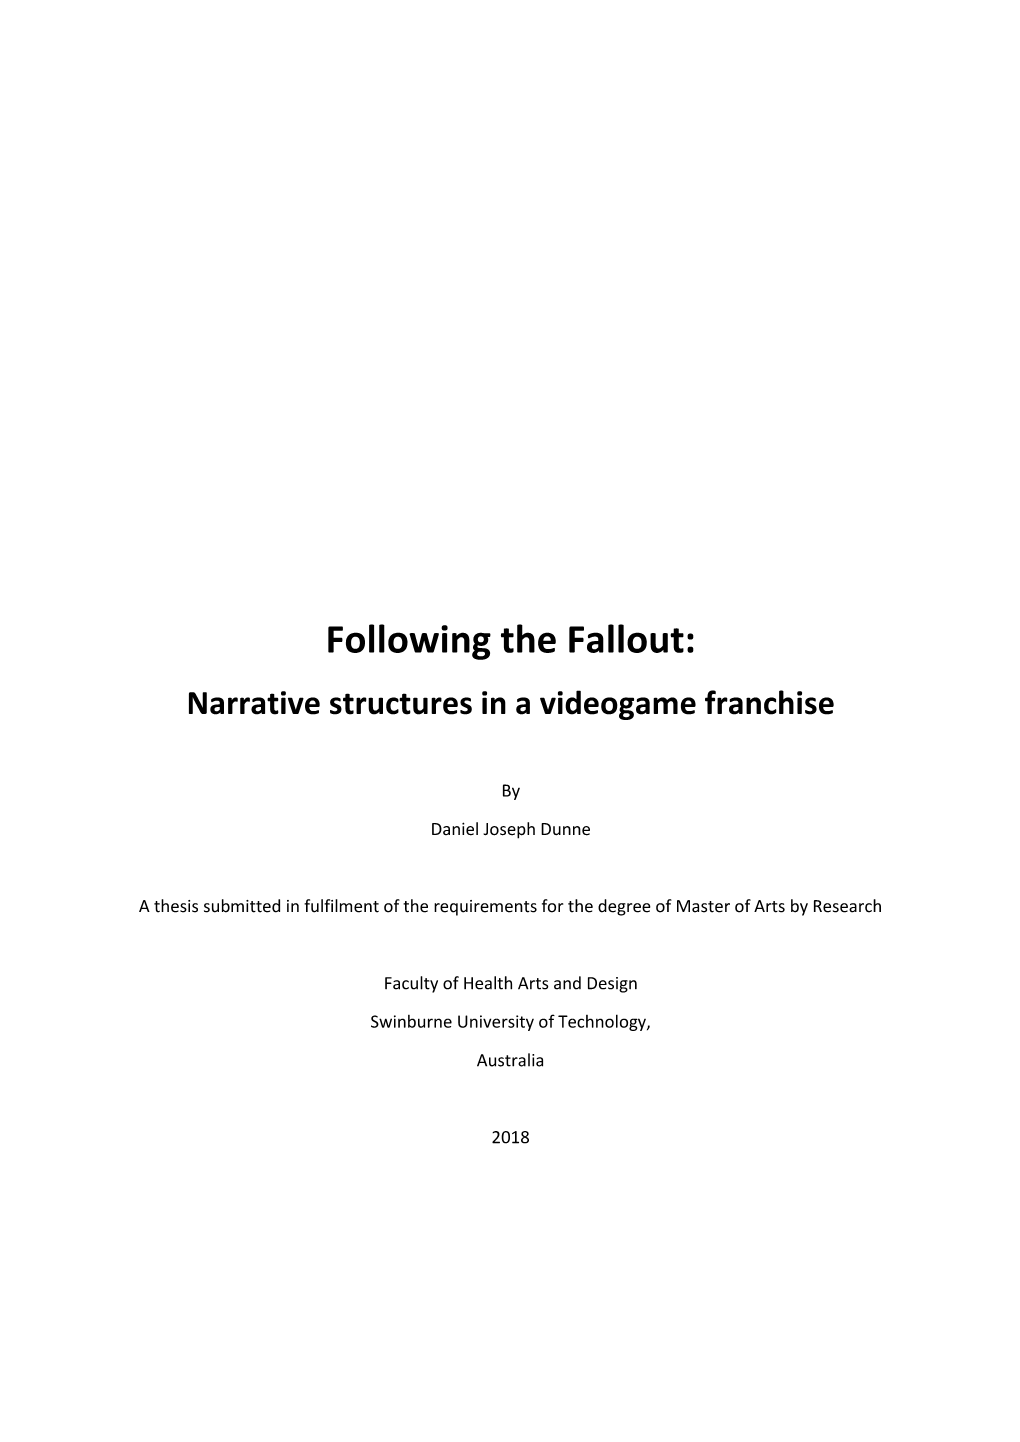 Following the Fallout: Narrative Structures in a Videogame Franchise